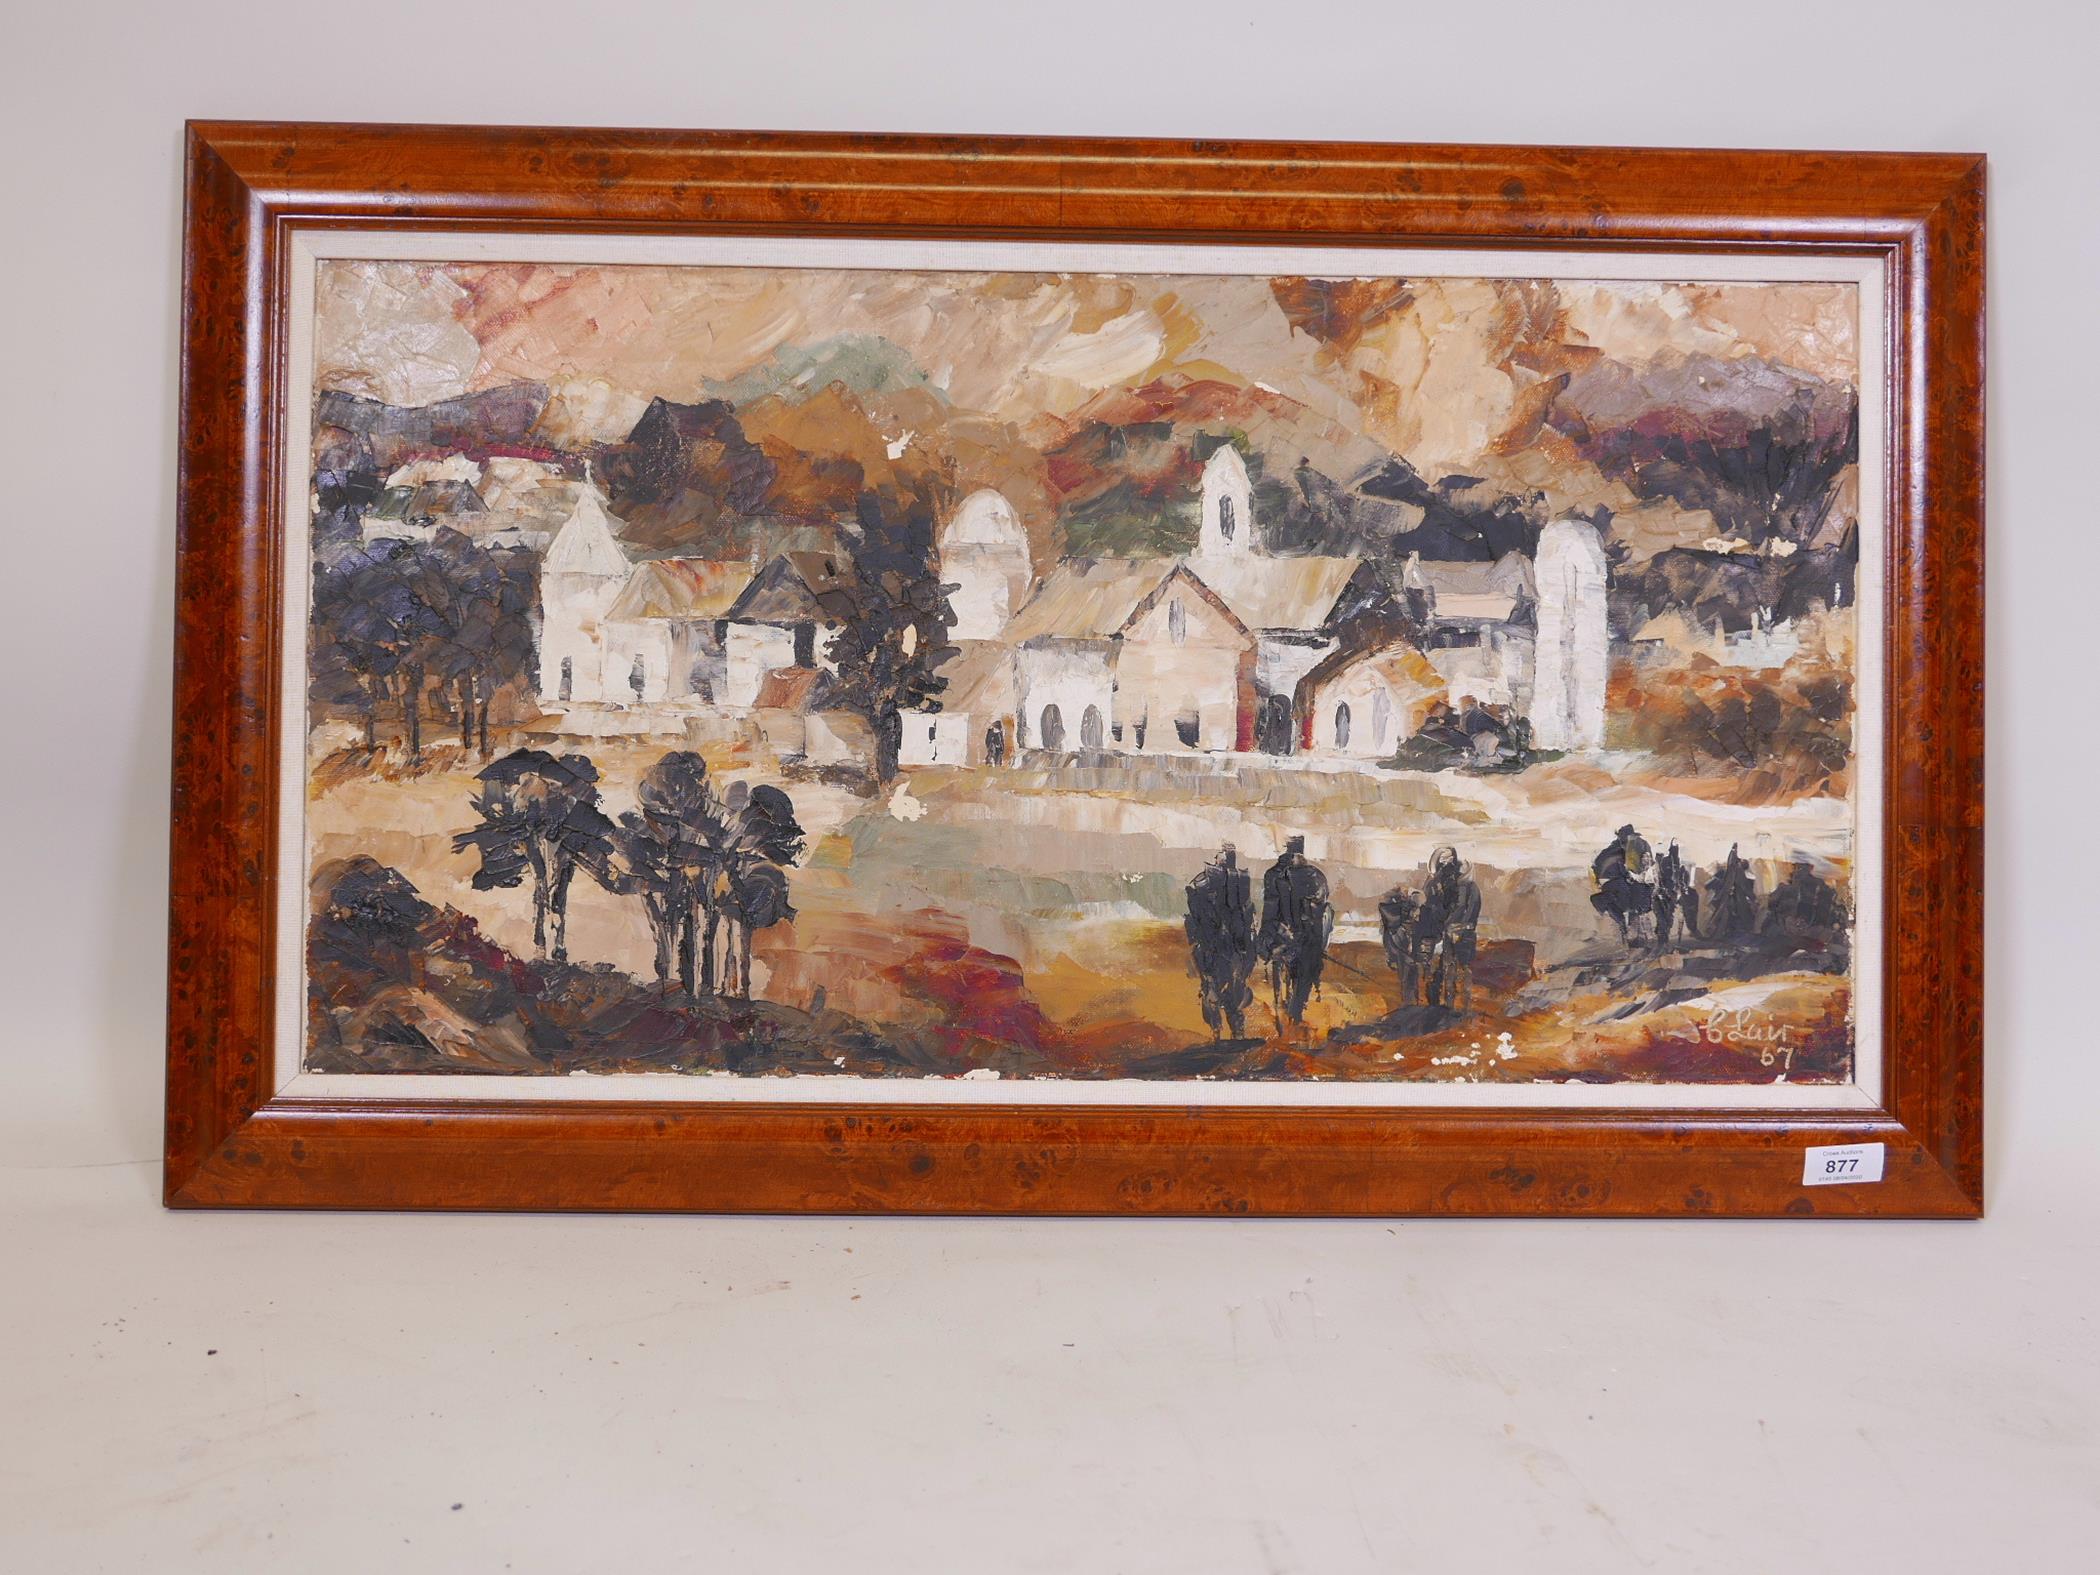 Claire Calkin (?), landscape, signed Clair '67, inscribed verso, oil on canvas, 16" x 30" - Image 2 of 5